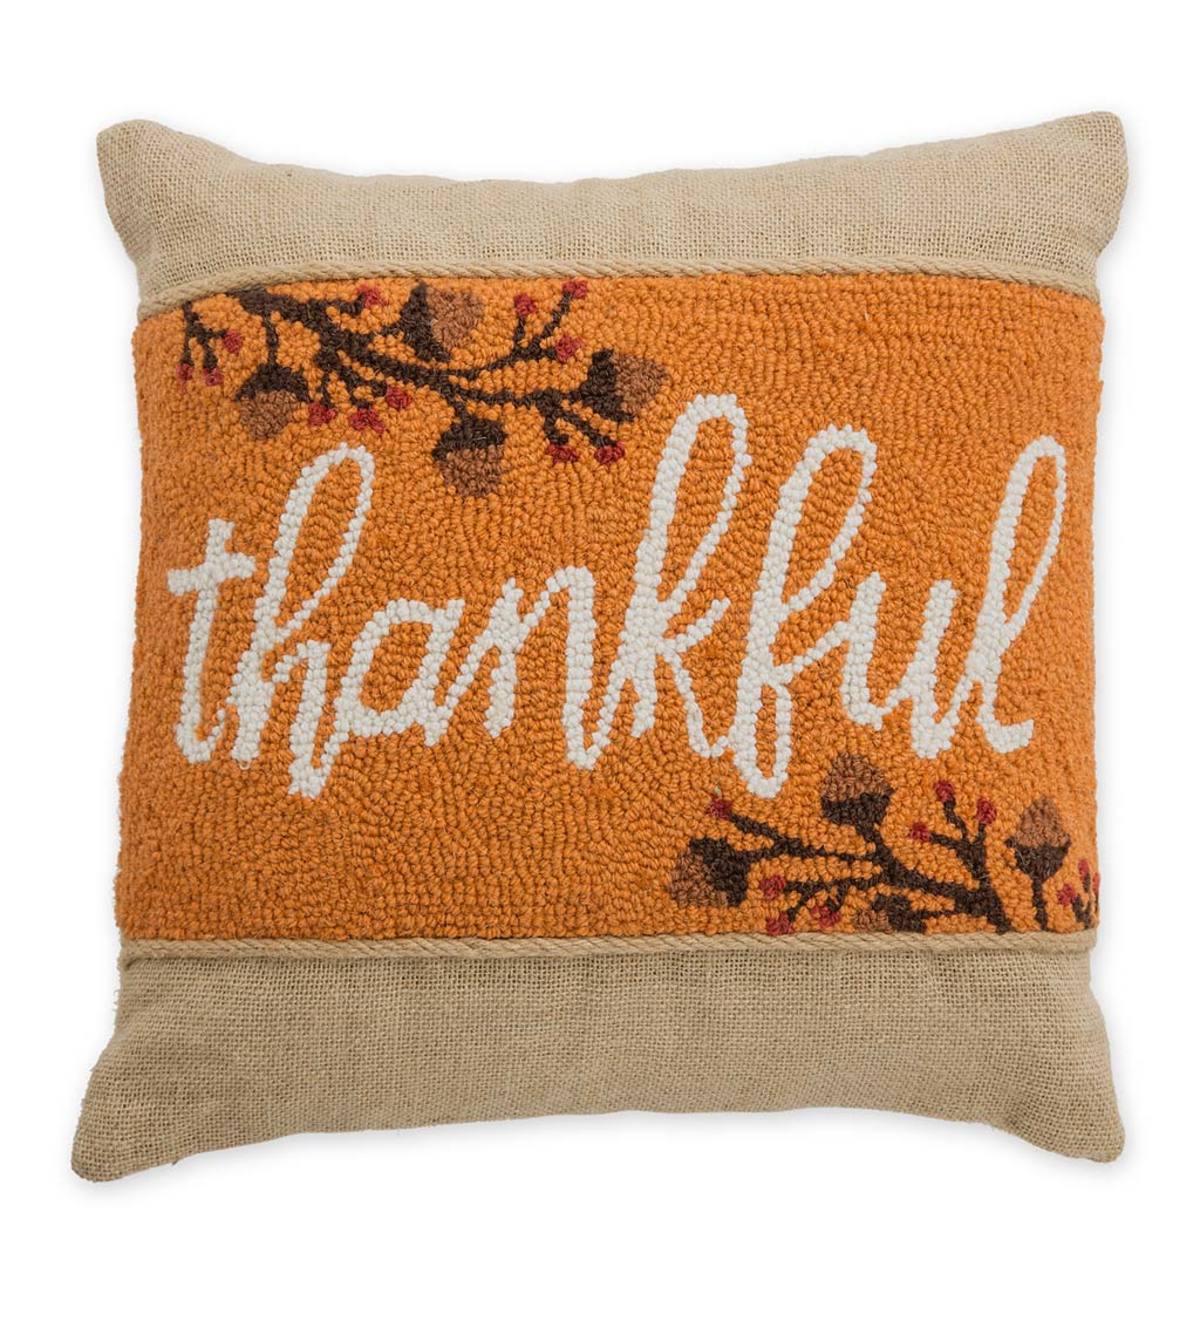 Hooked Wool and Burlap Thankful Throw Pillow